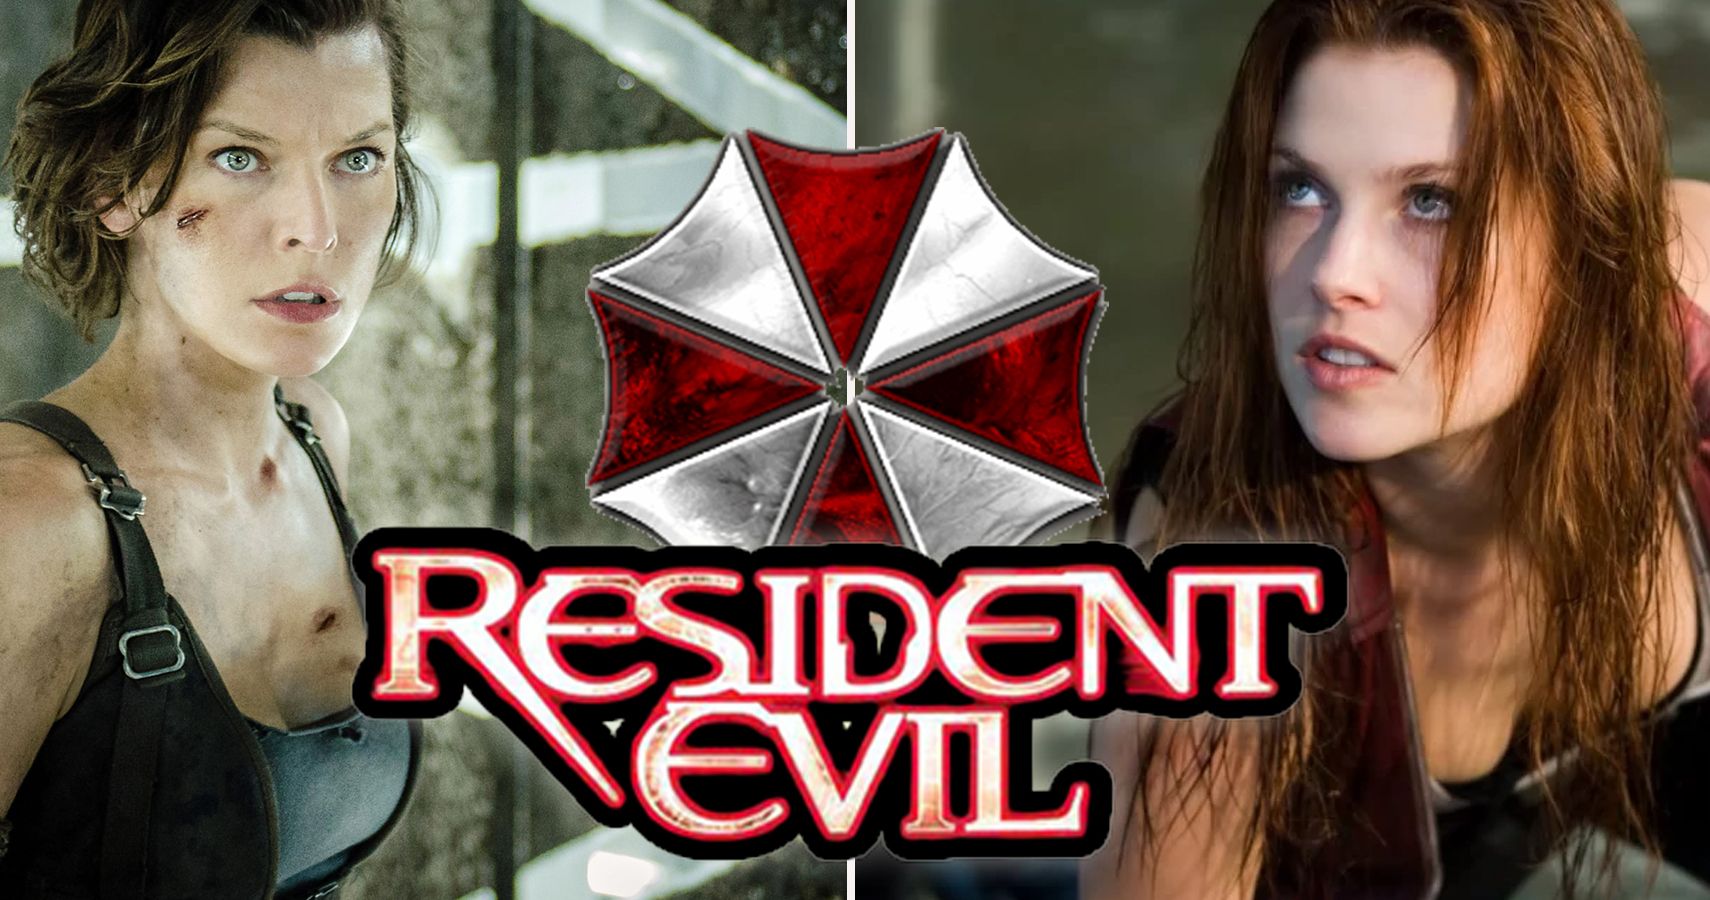 The Resident Evil Movies Are Good, And I'm Tired Of Pretending